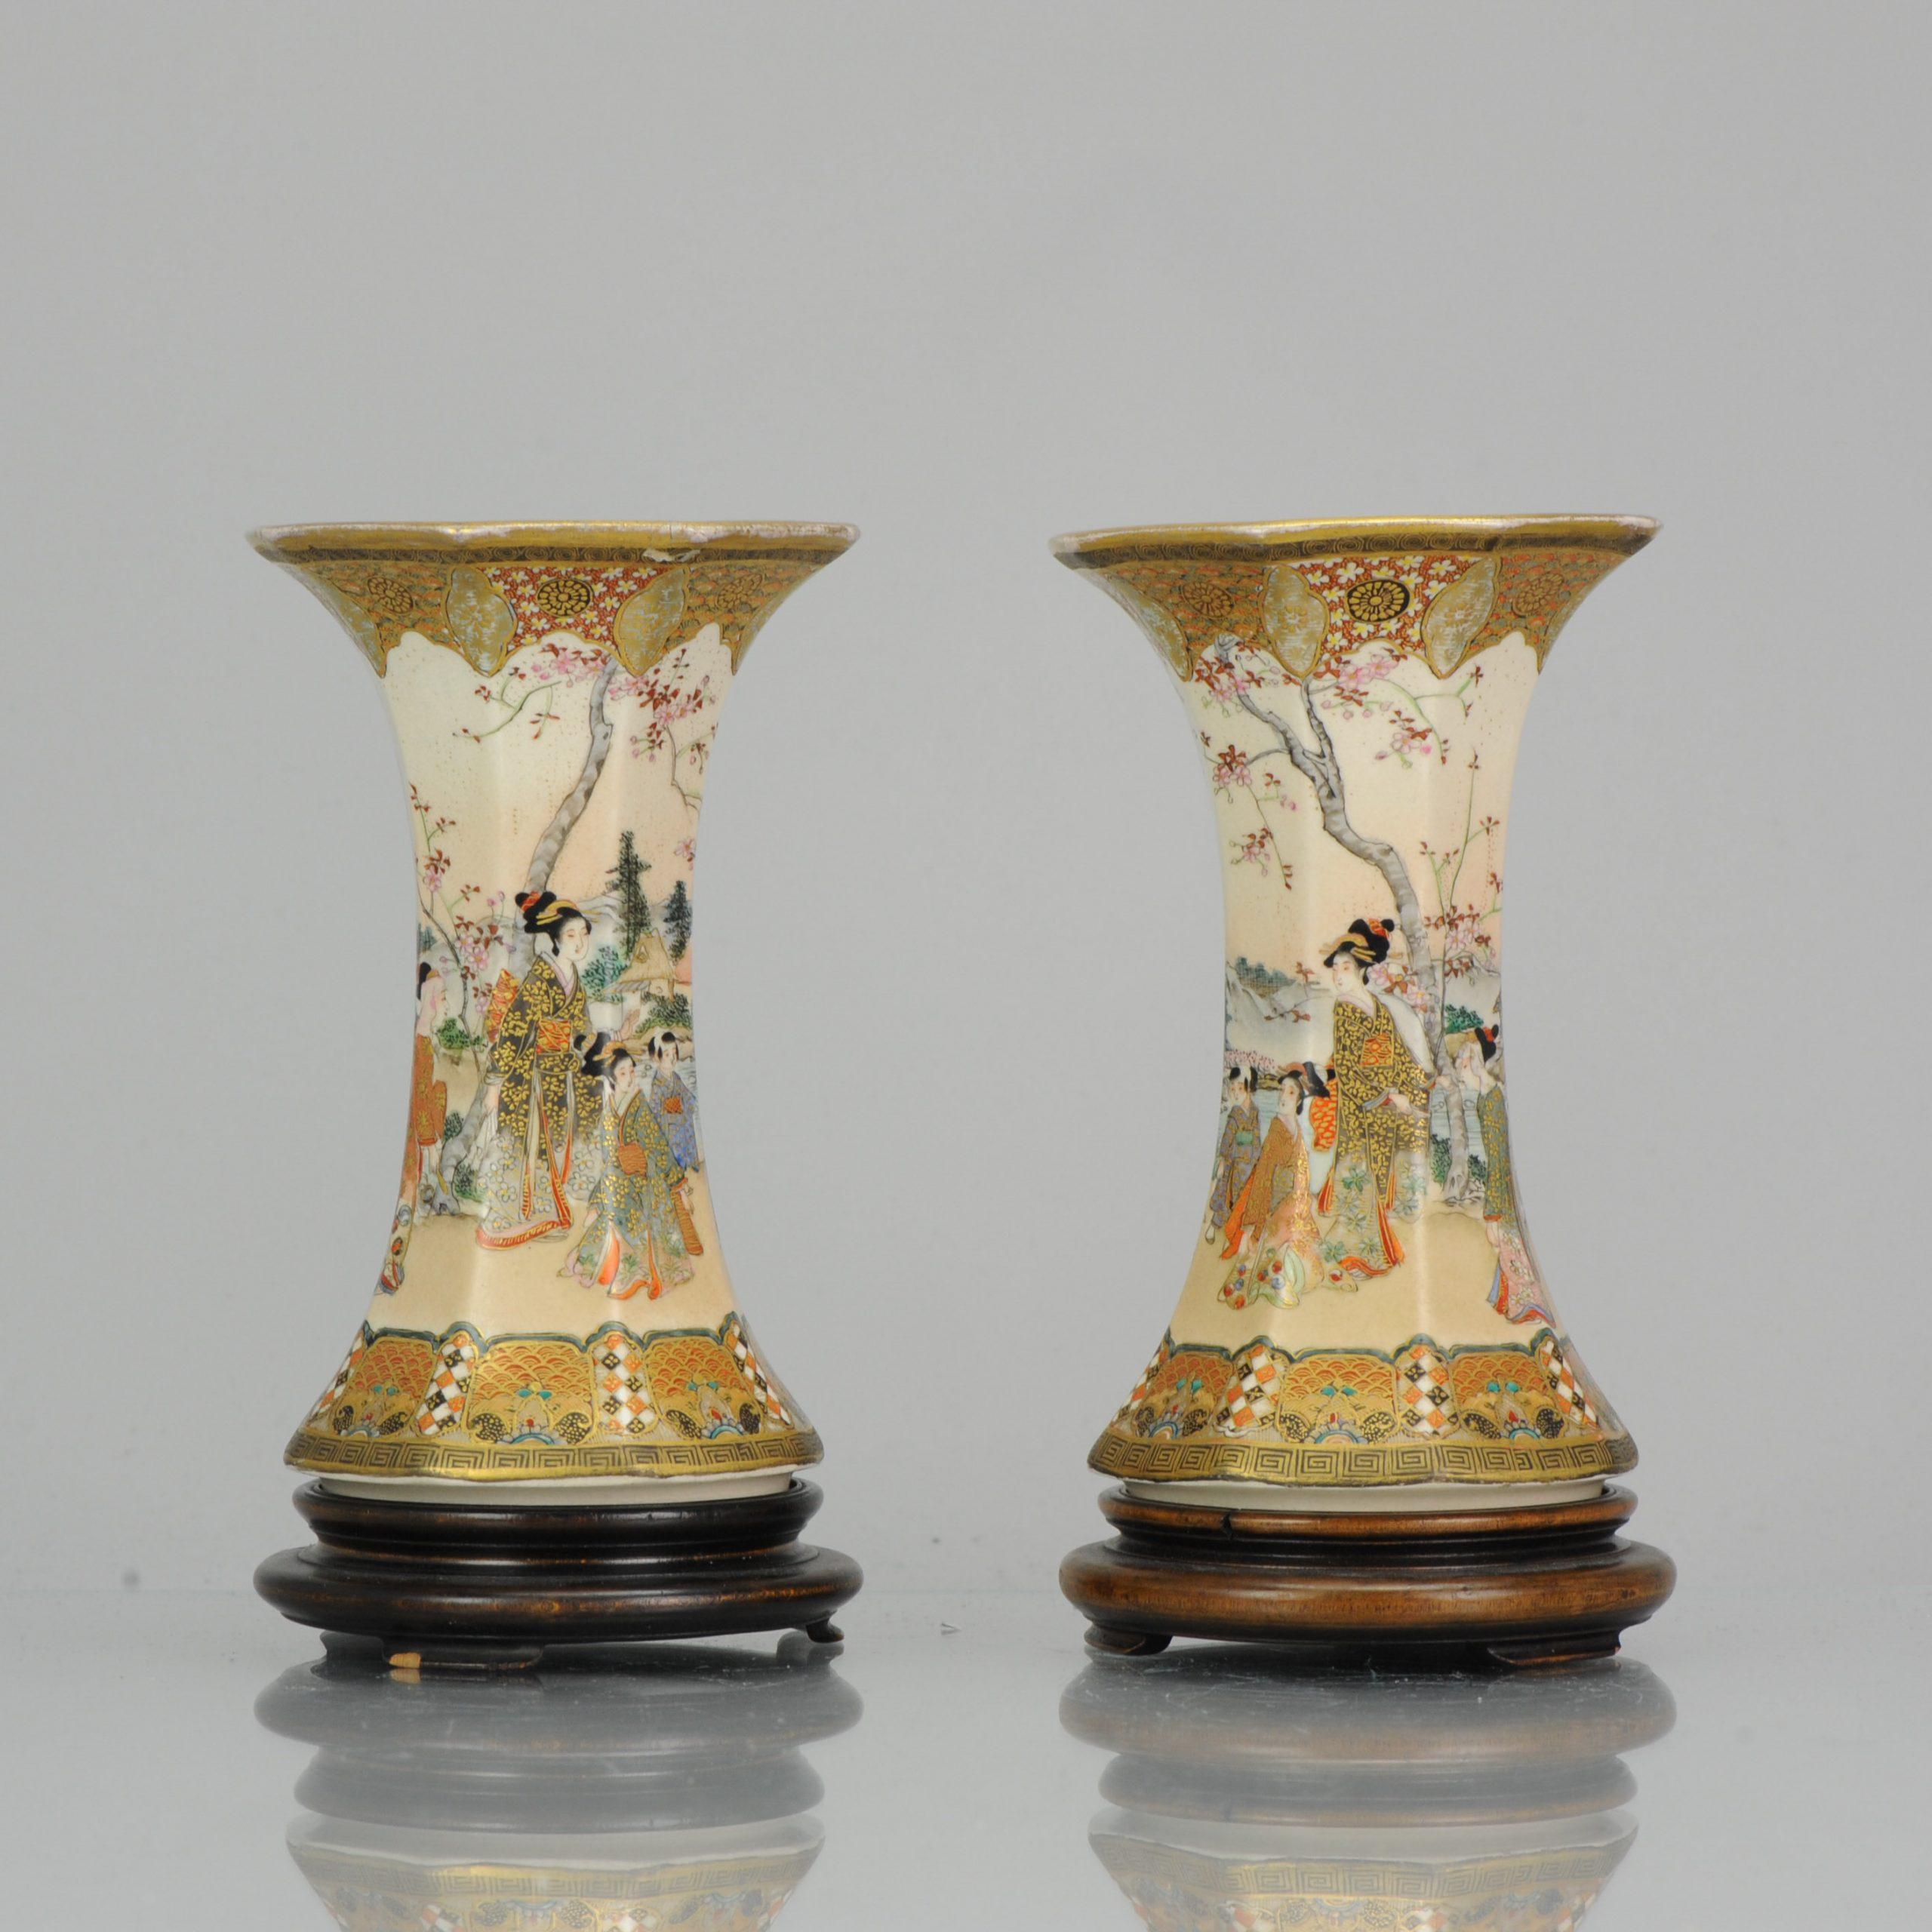 Fabulous Japanese Satsuma vases marked ????Bankozan on the base. All around village garden scene with elegant ladies and children.

Stands included

Accompanied with a letter dating 1914 that indicates that the vases were given as a wedding